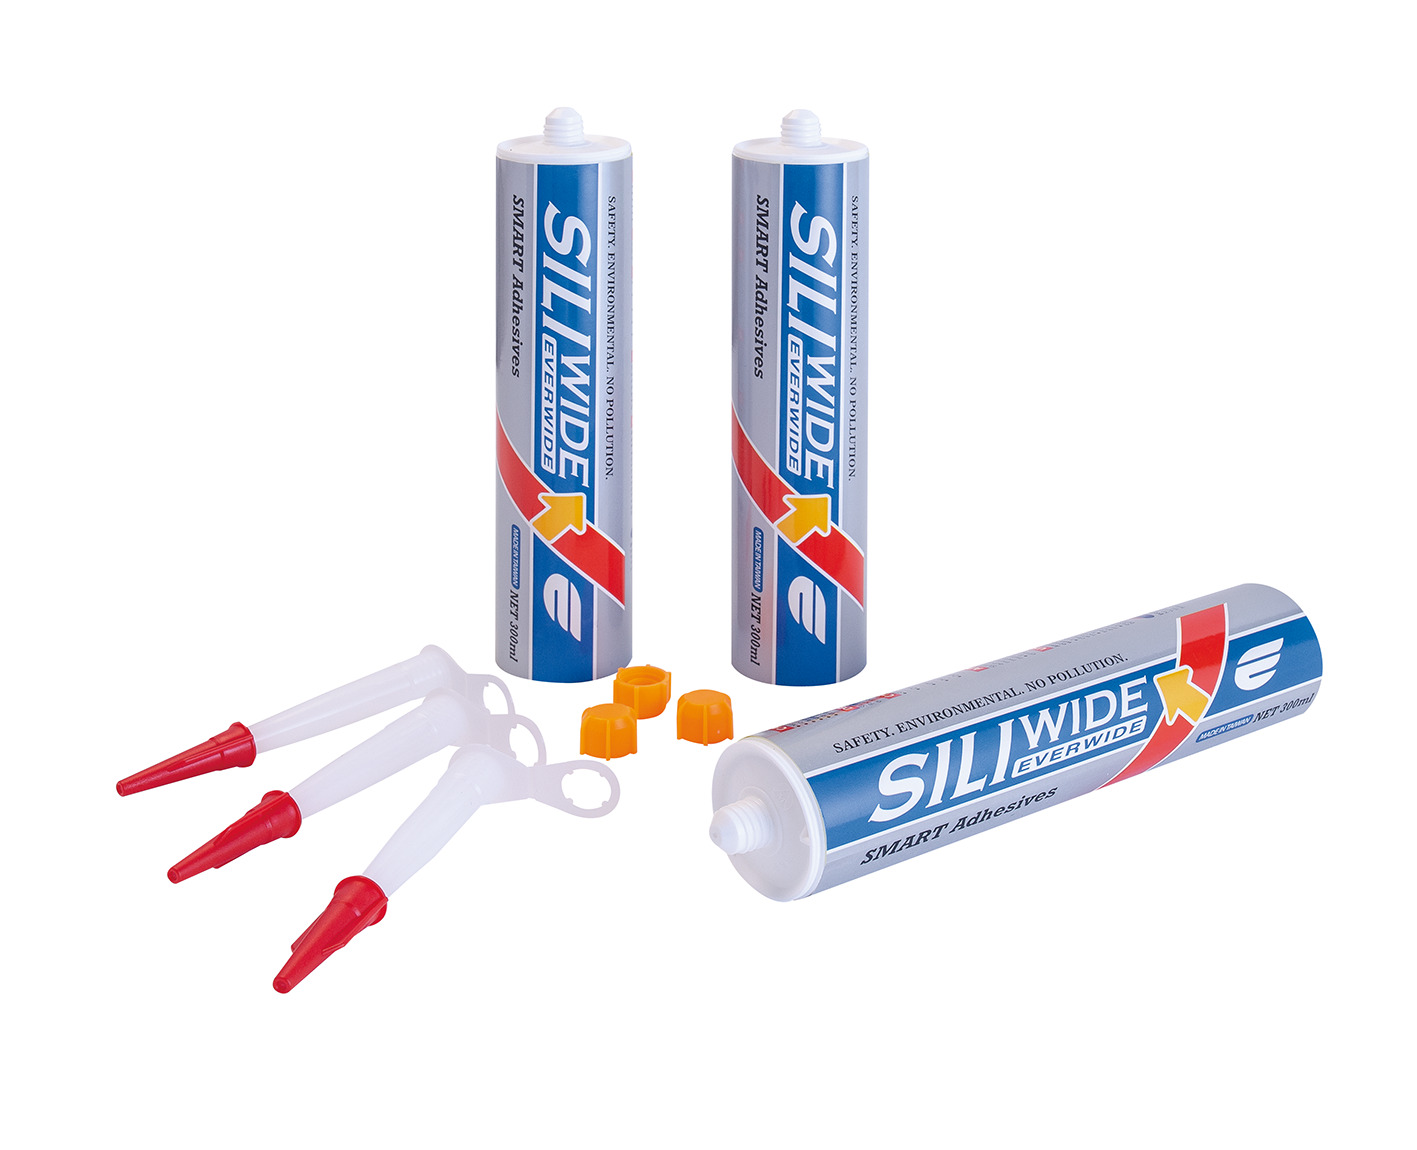 Modified Silicone Adhesives - High Strength Sealant - Flexible and